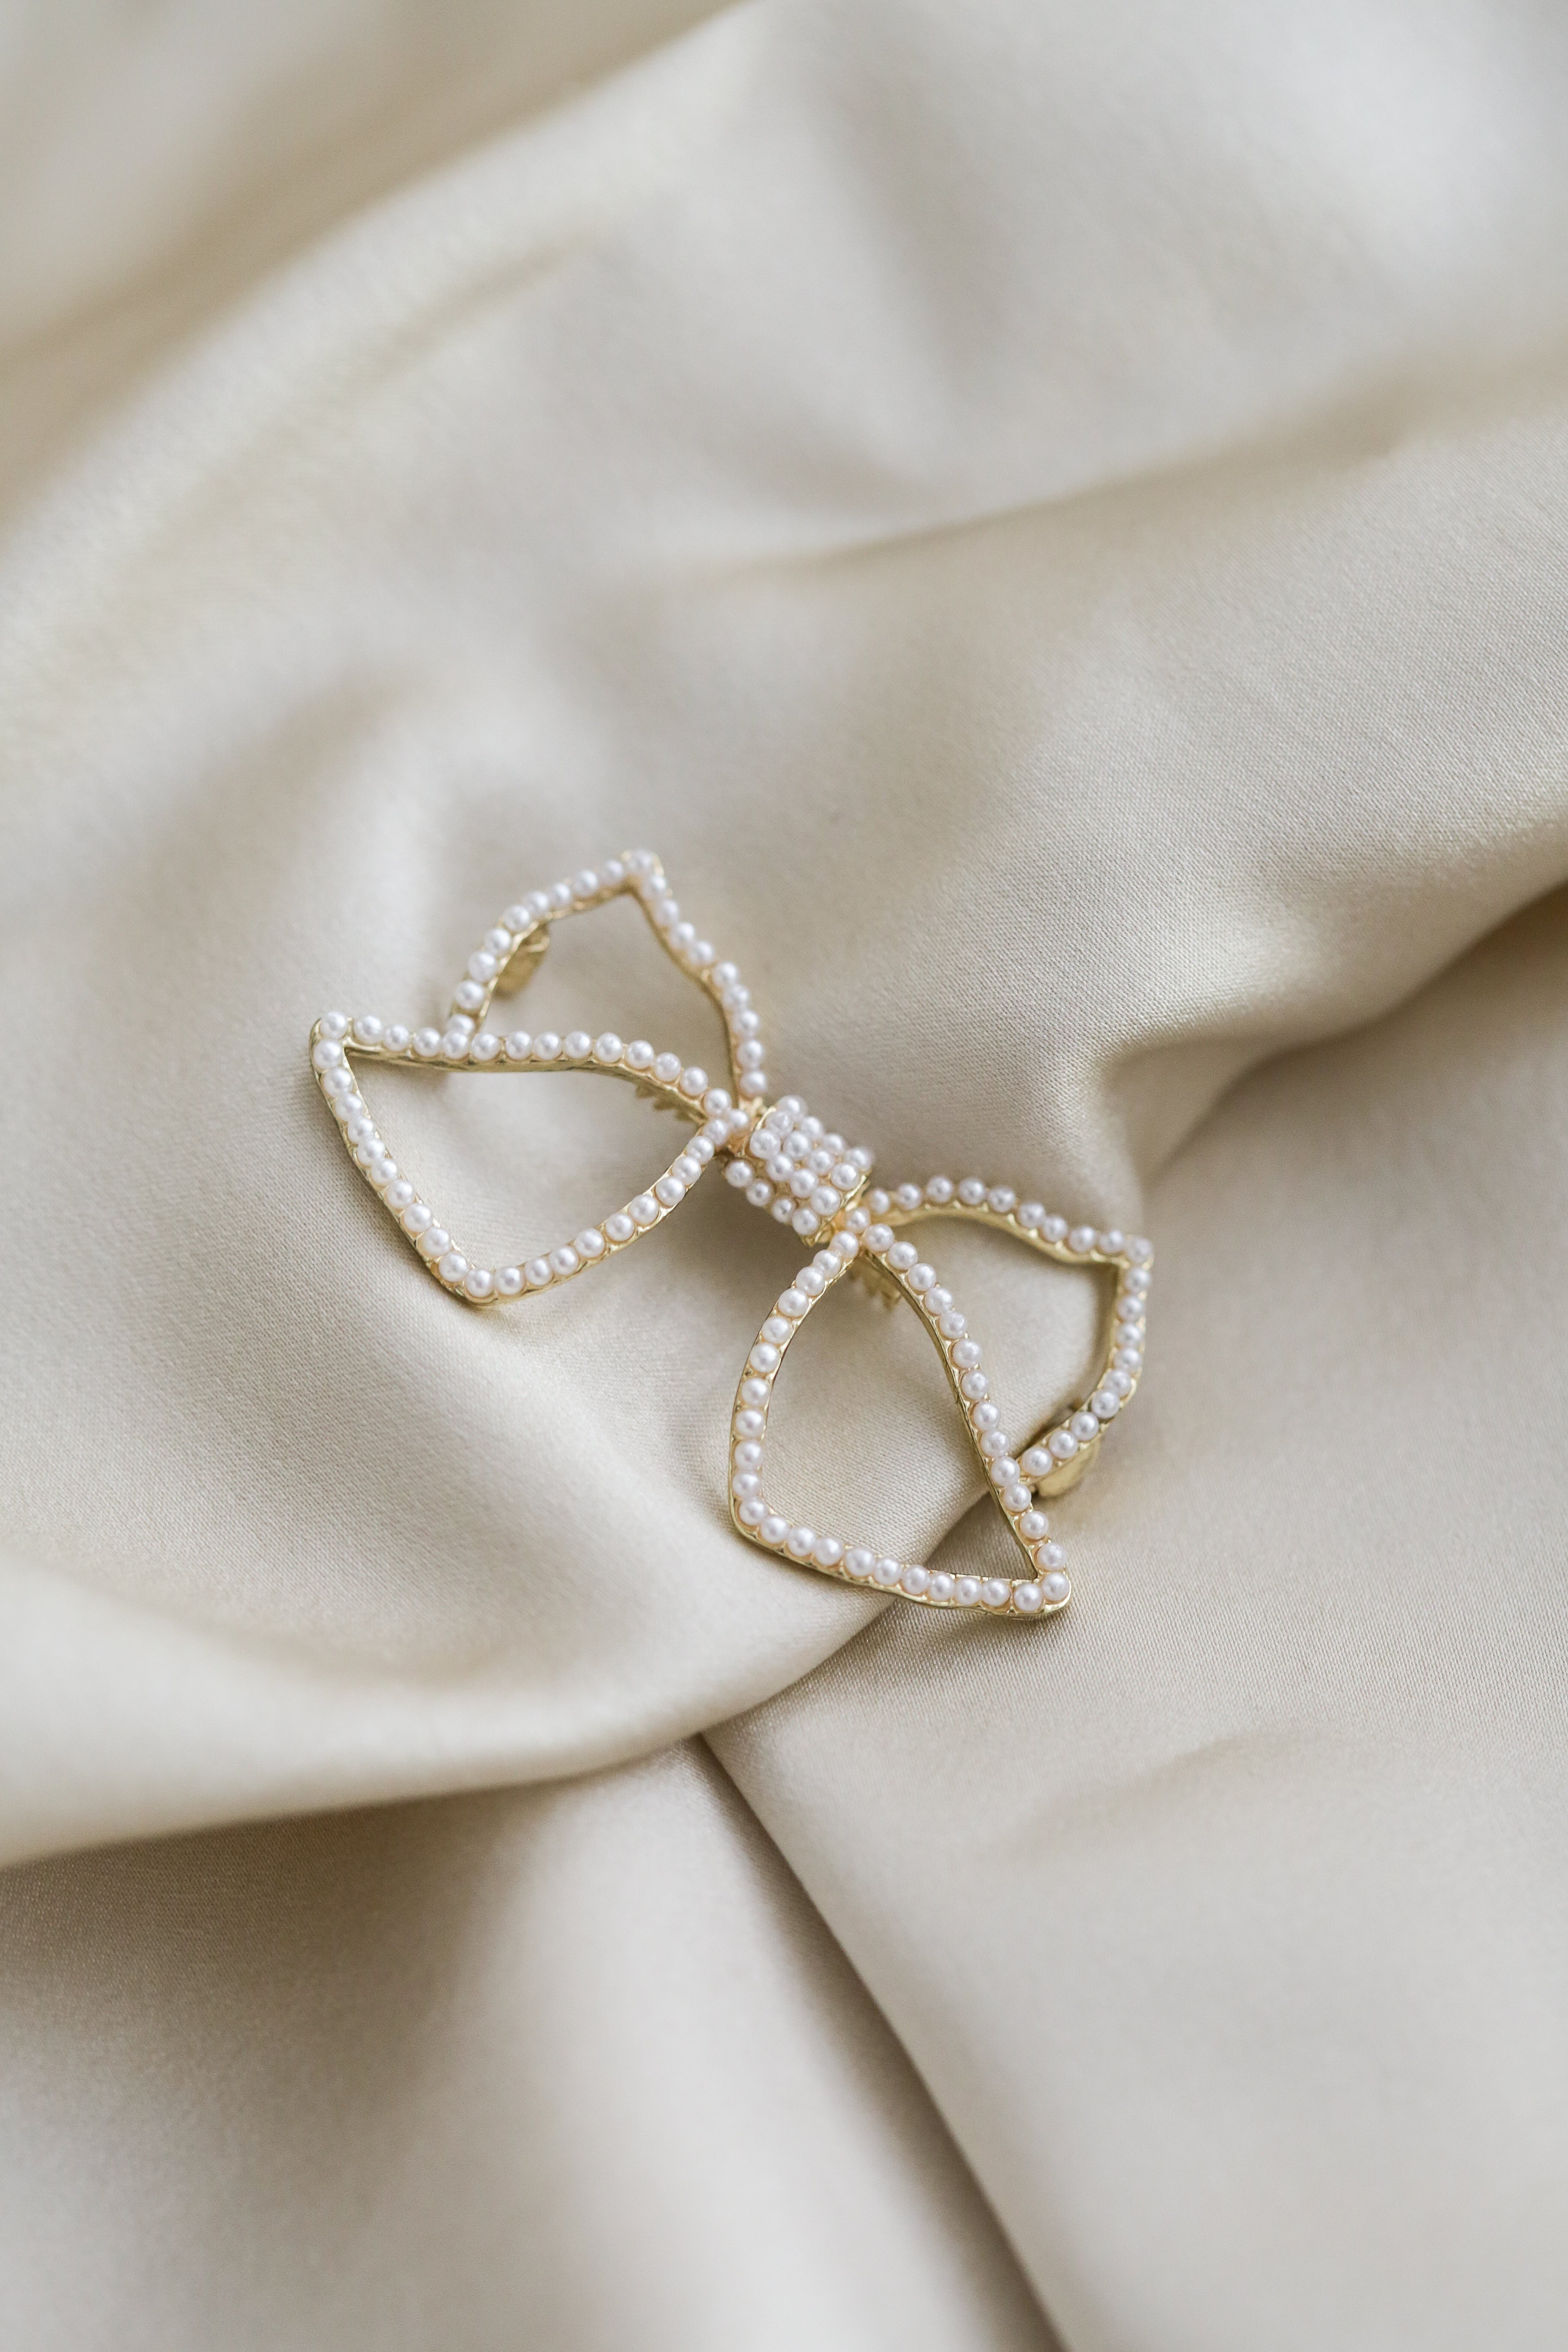 The Heart - Bow Pearls Hair Clip - Boutique Minimaliste has waterproof, durable, elegant and vintage inspired jewelry